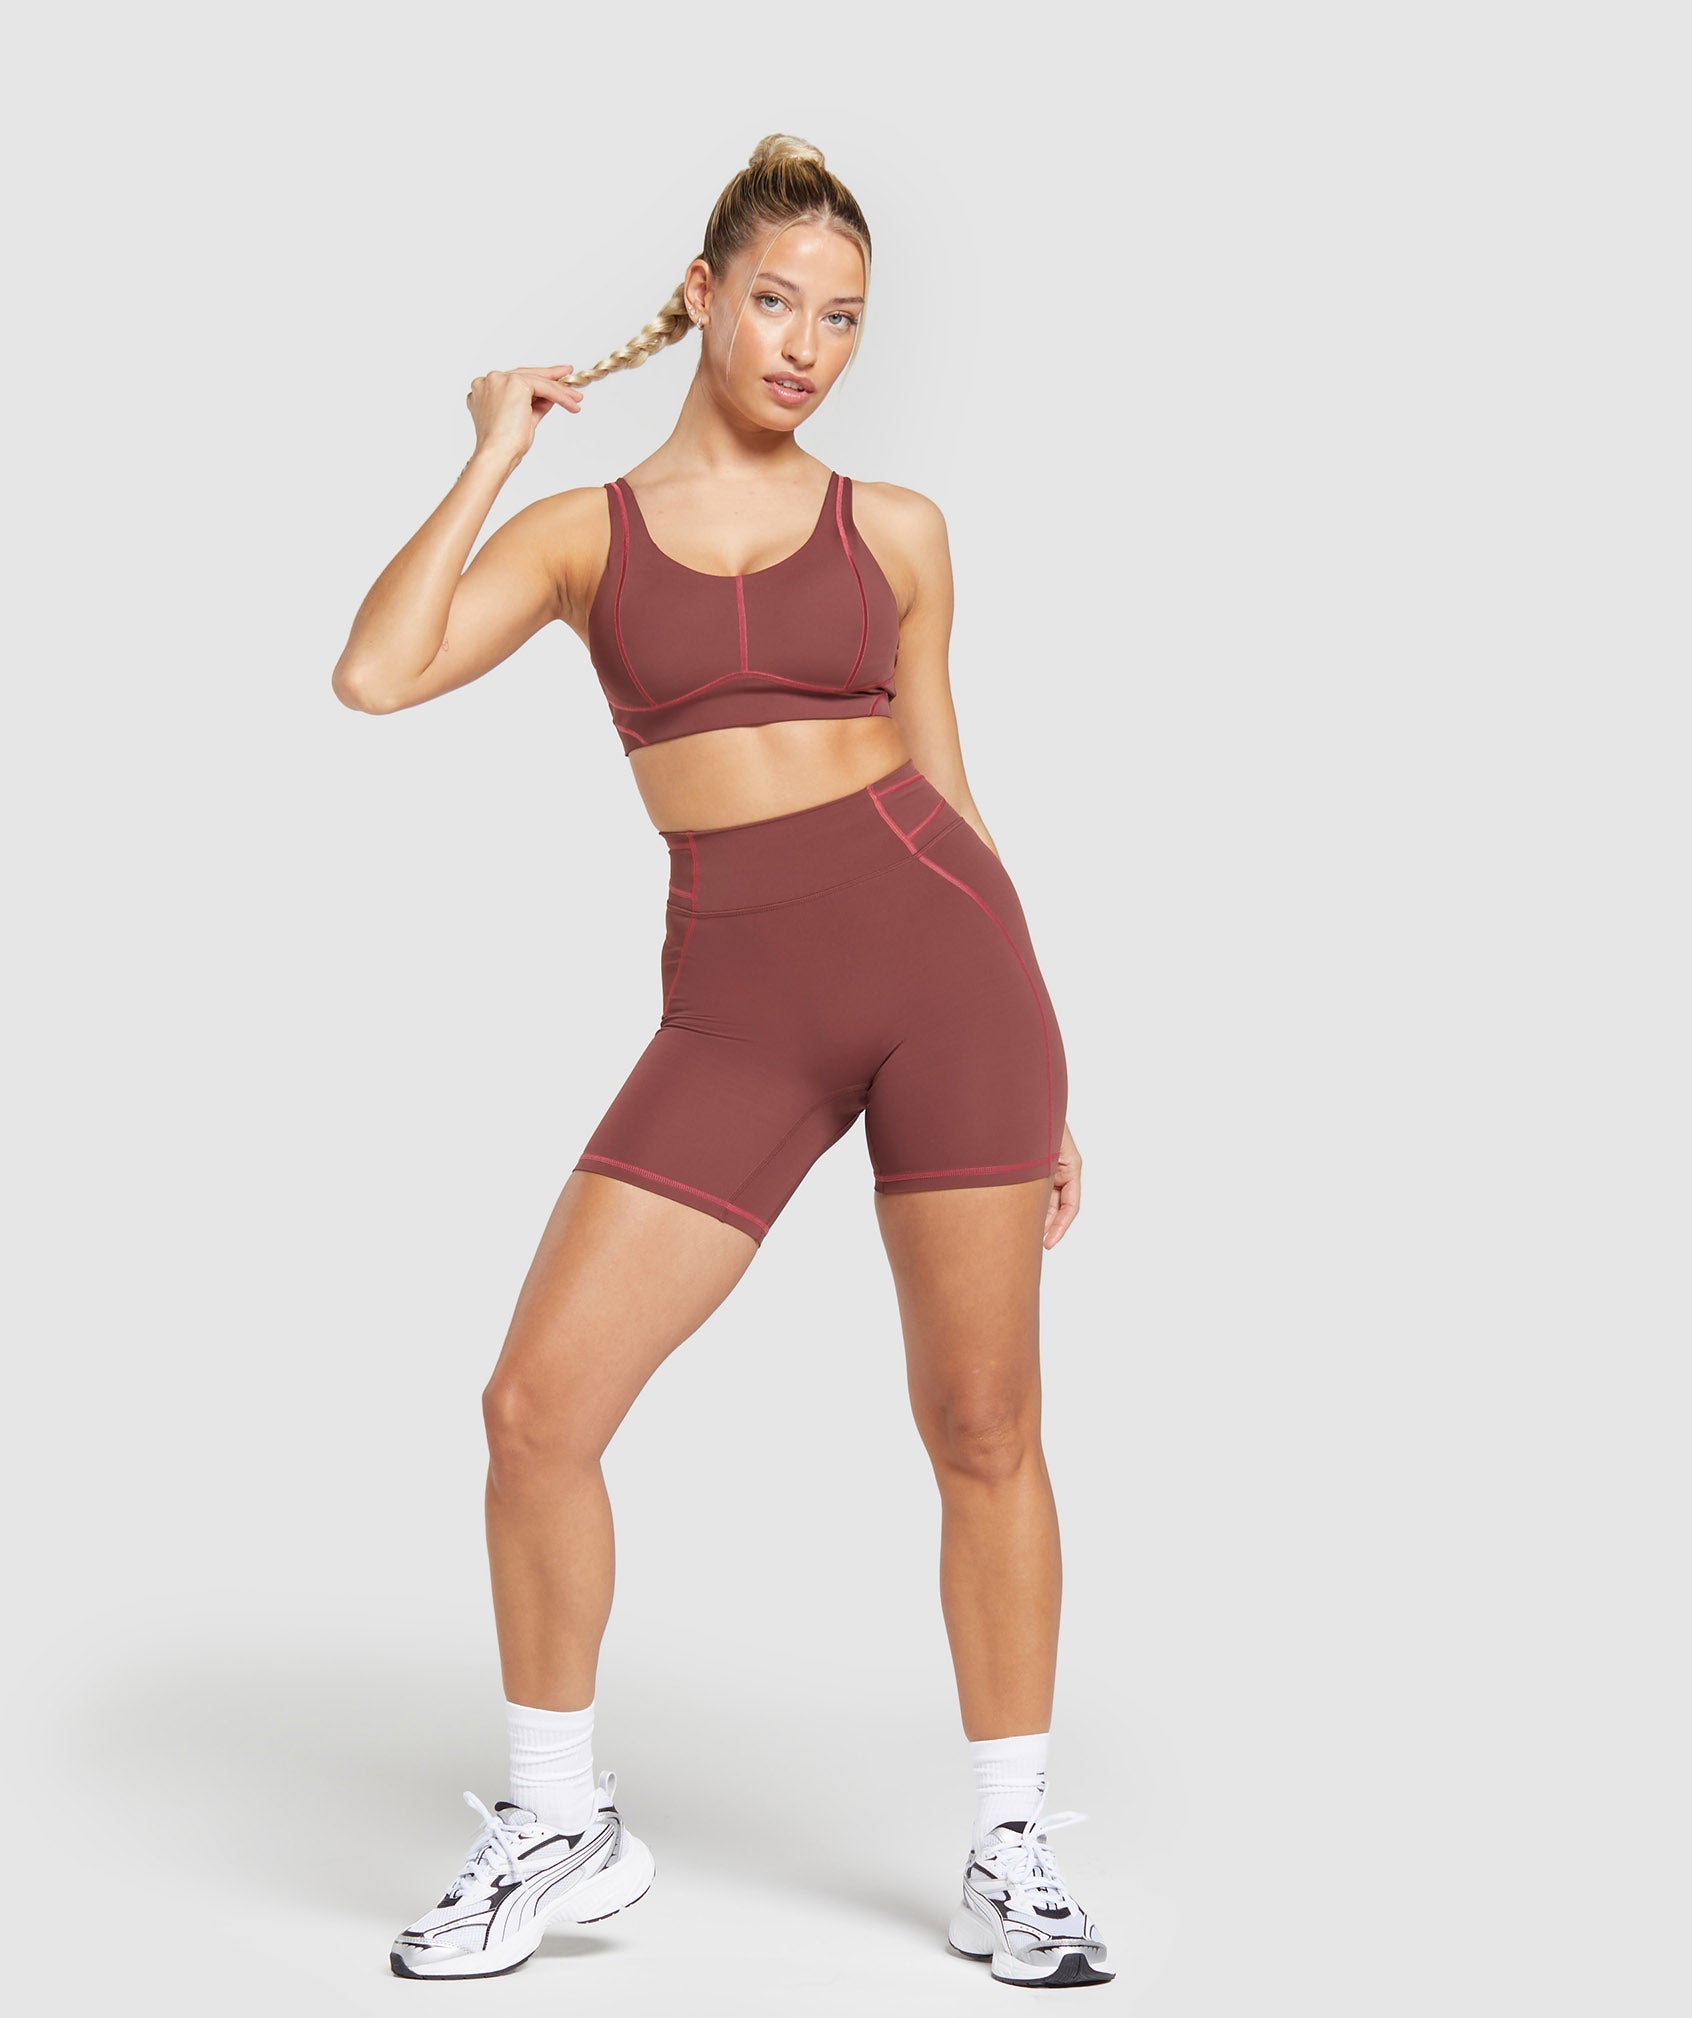 Stitch Feature Shorts in Burgundy Brown - view 4